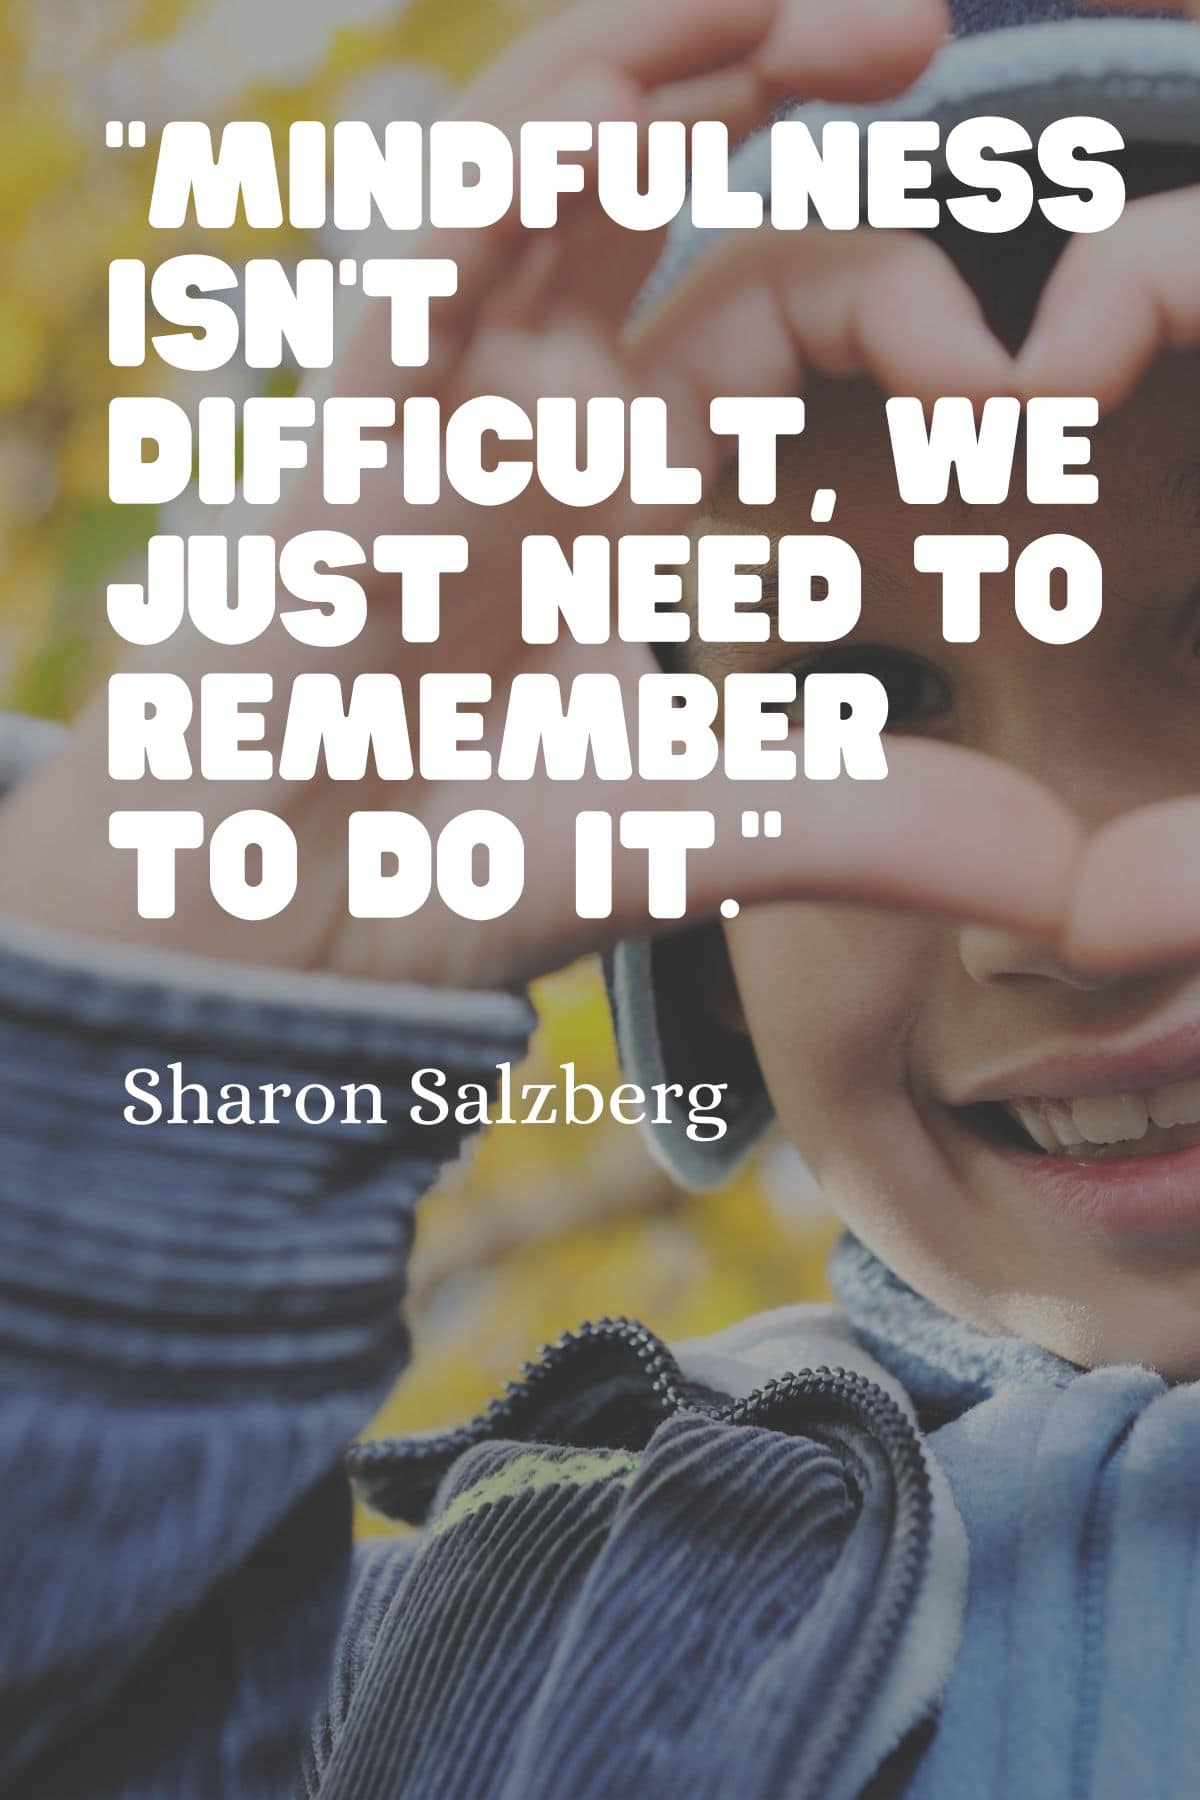 “Mindfulness isn’t difficult, we just need to remember to do it.” - Sharon Salzberg